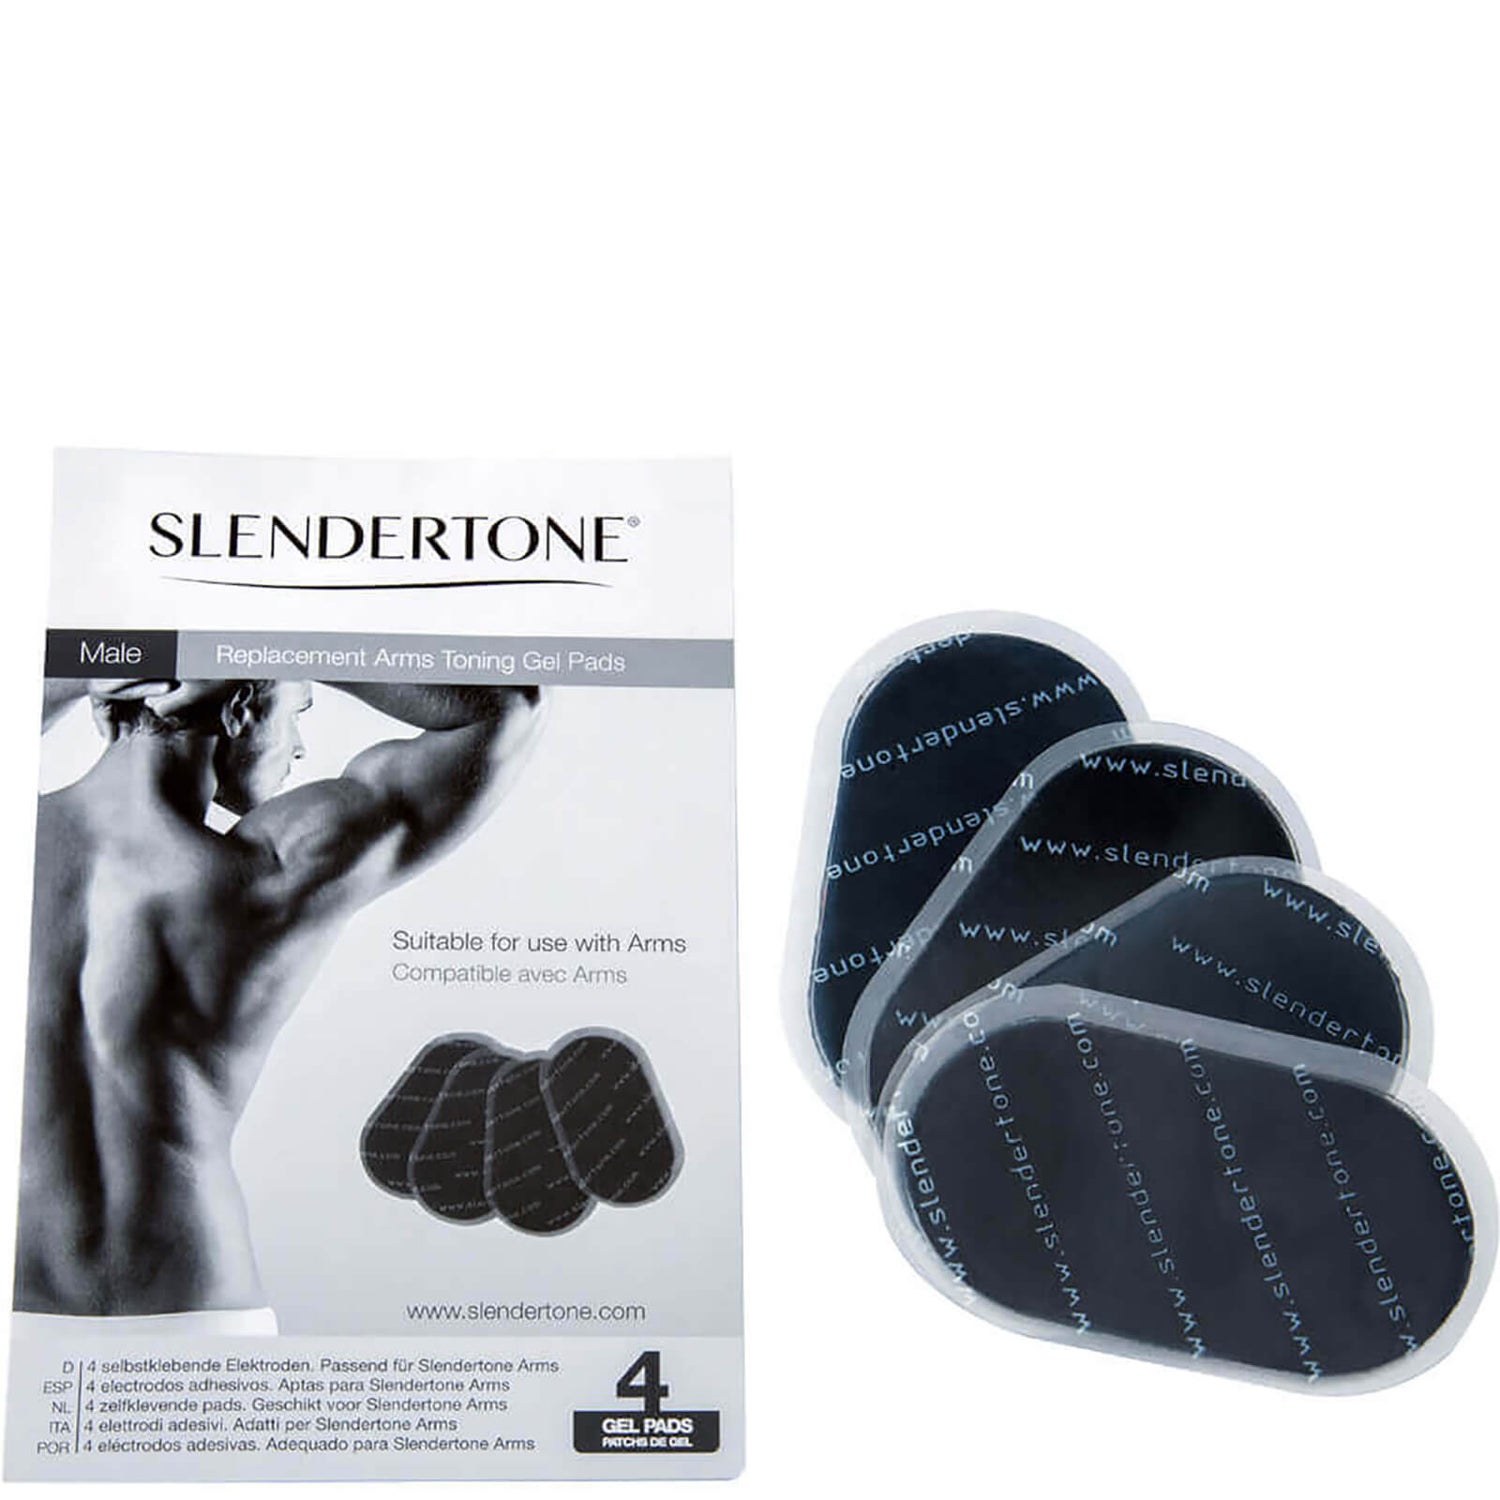 Slendertone Male Arms Replacement Pads